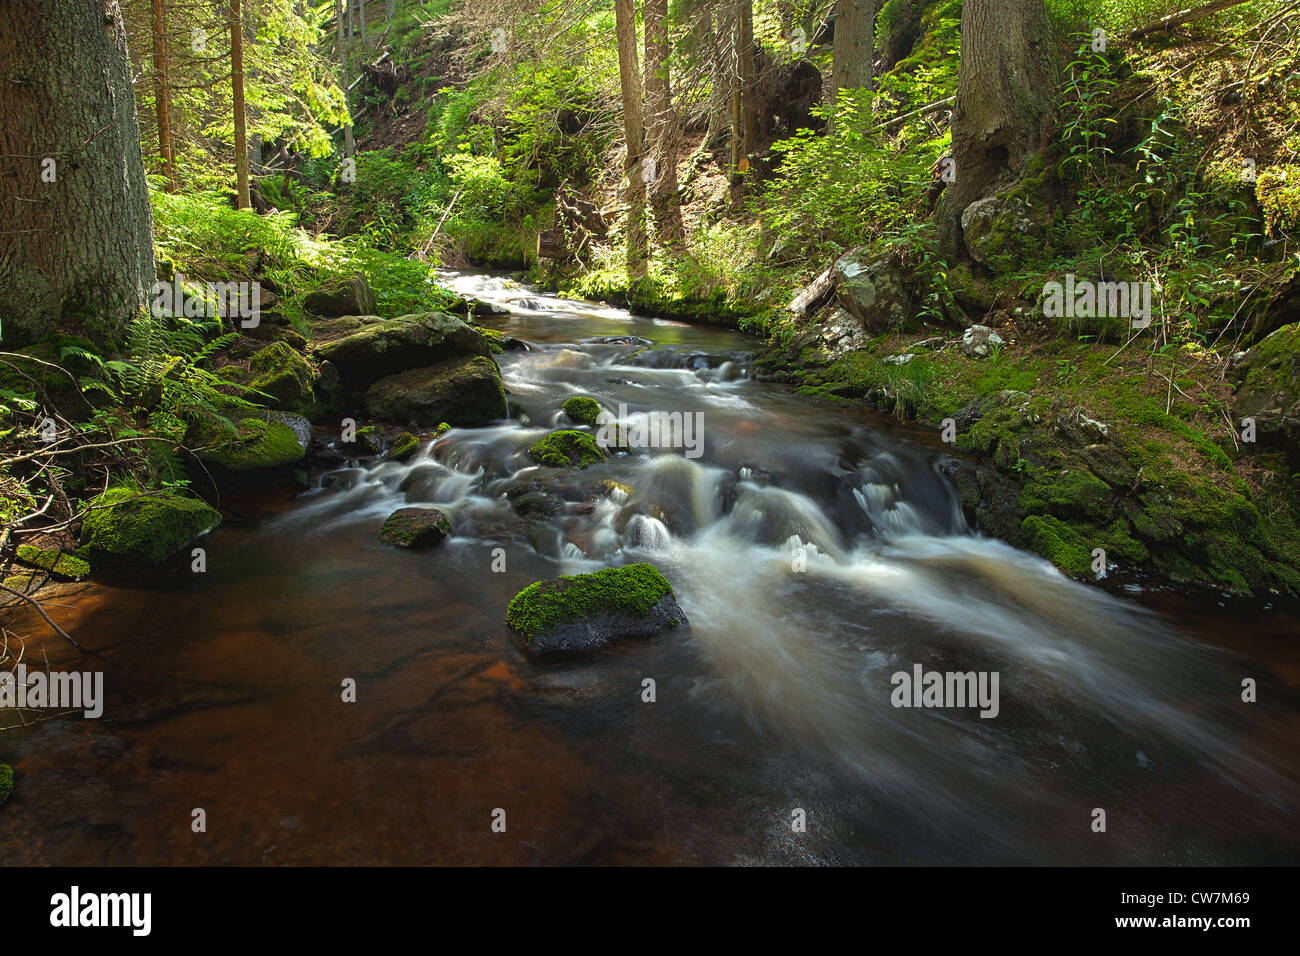 The river runs over boulders in the primeval forest Stock Photo